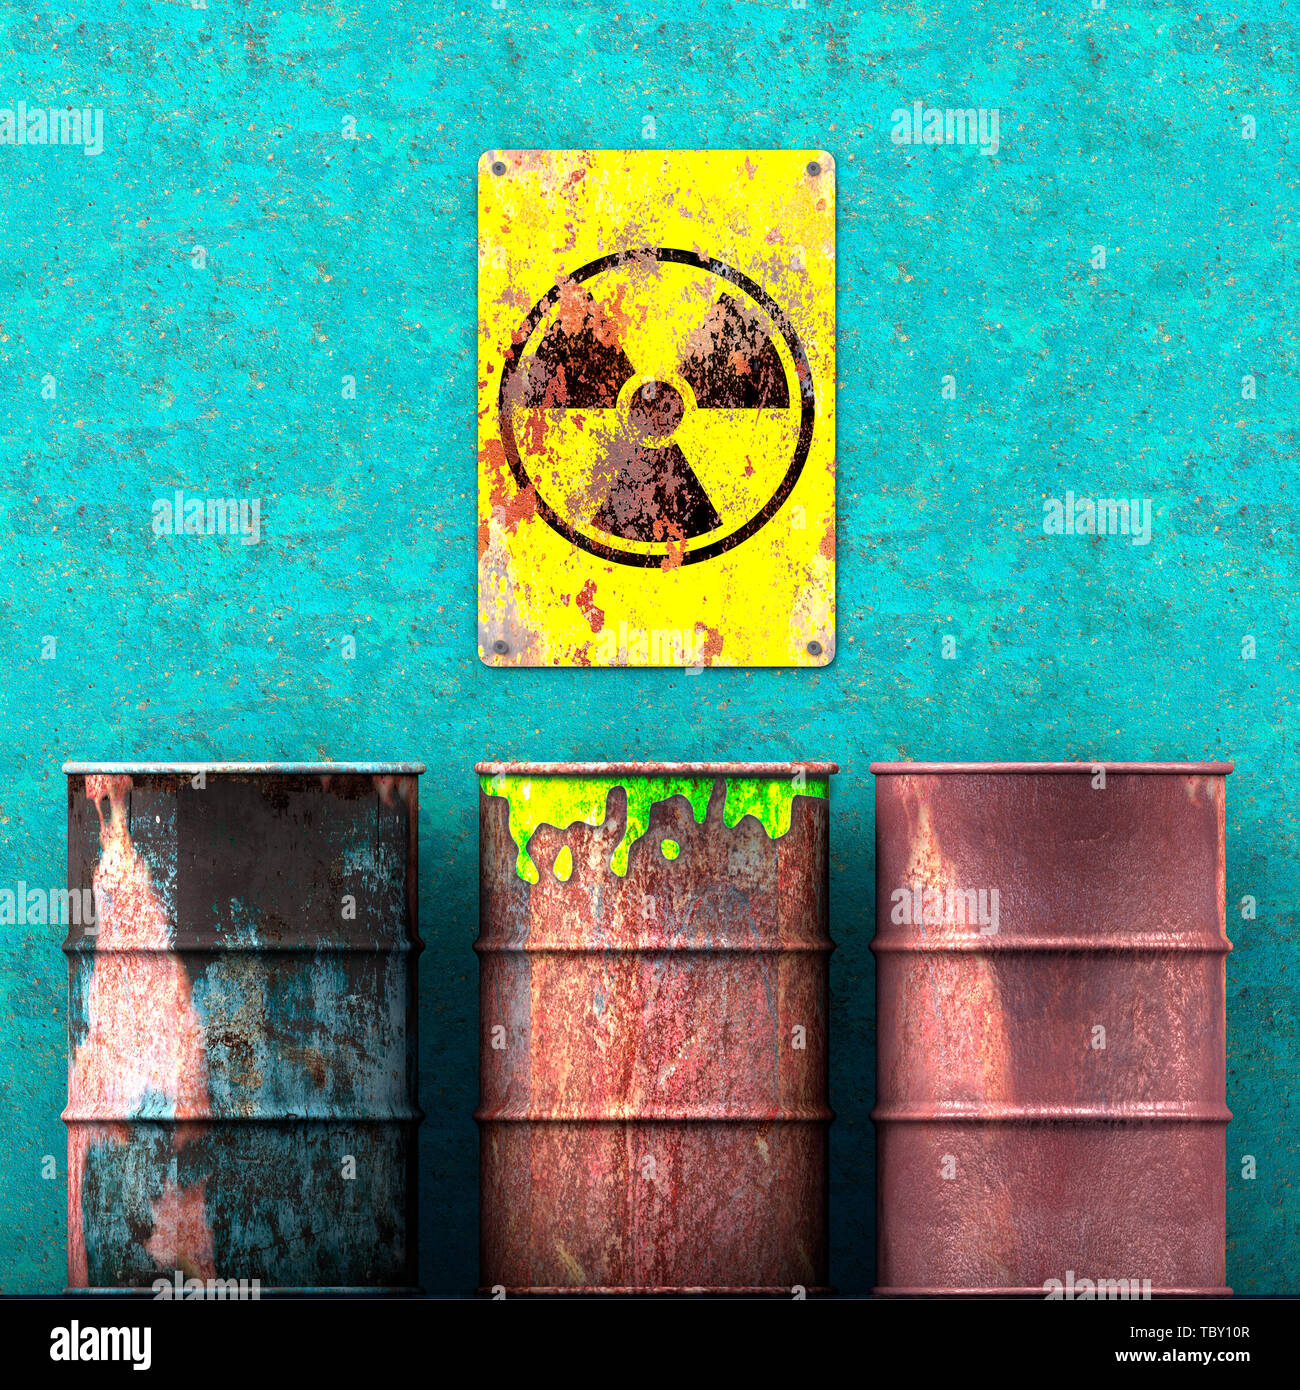 Storage radioactive waste, barrels resting on a wall, sign with radioactivity symbol, nuclear material. 3d rendering Stock Photo